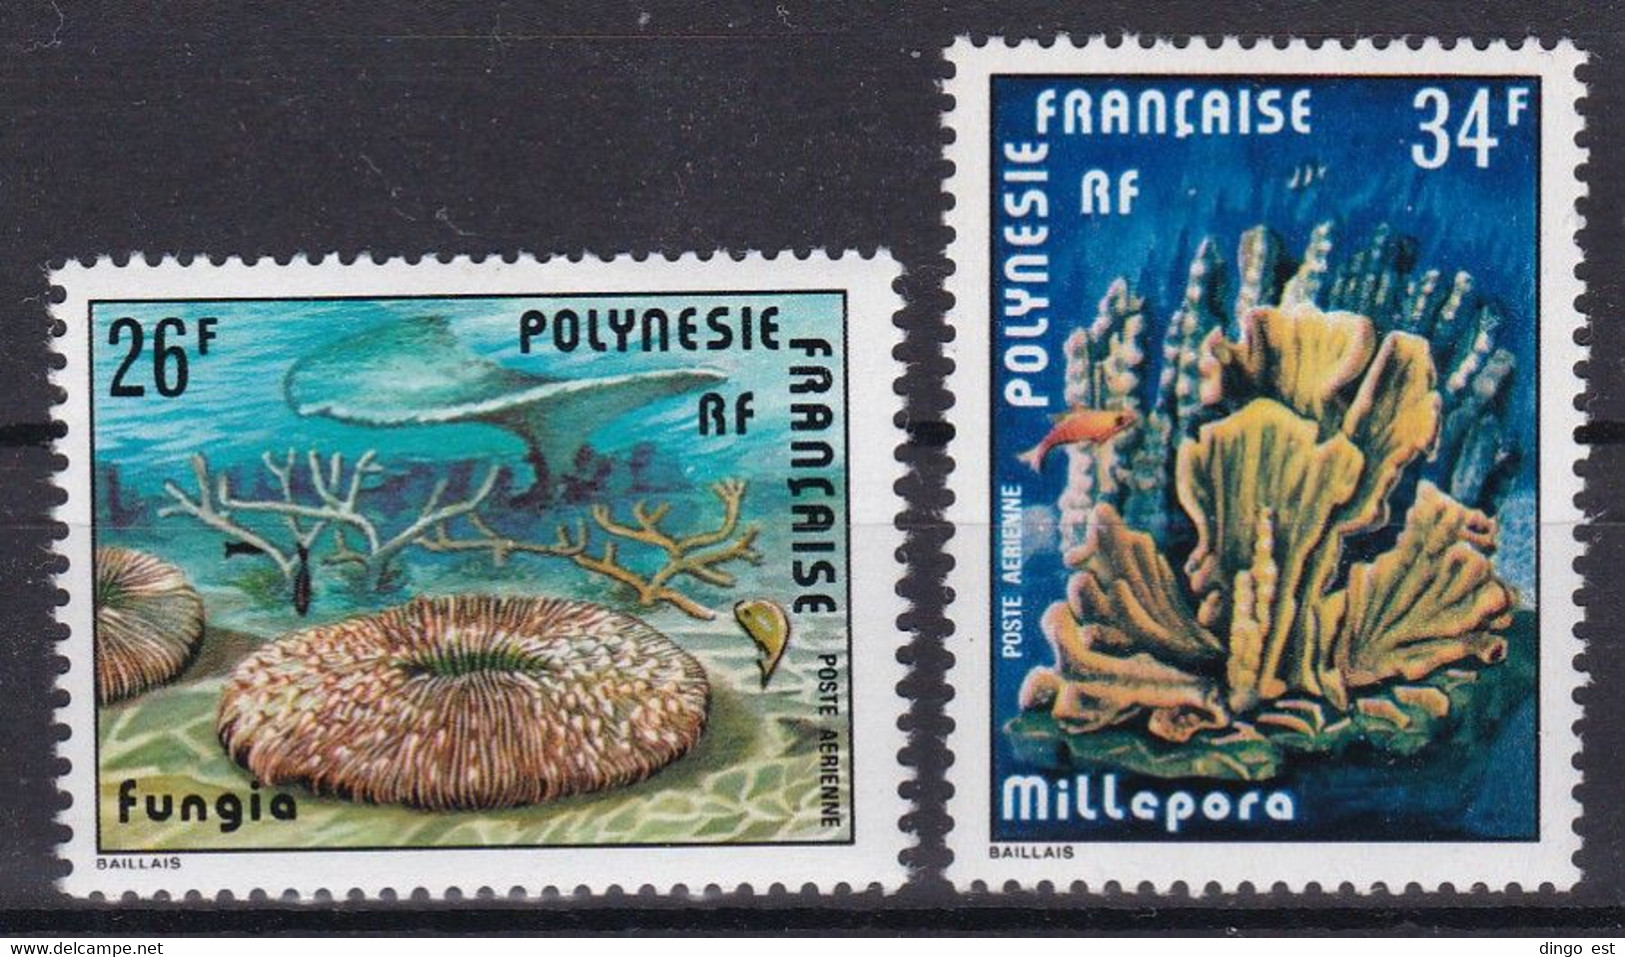 French Polynesia, Fauna, Corals, Fishes MNH / 1978 - Meereswelt